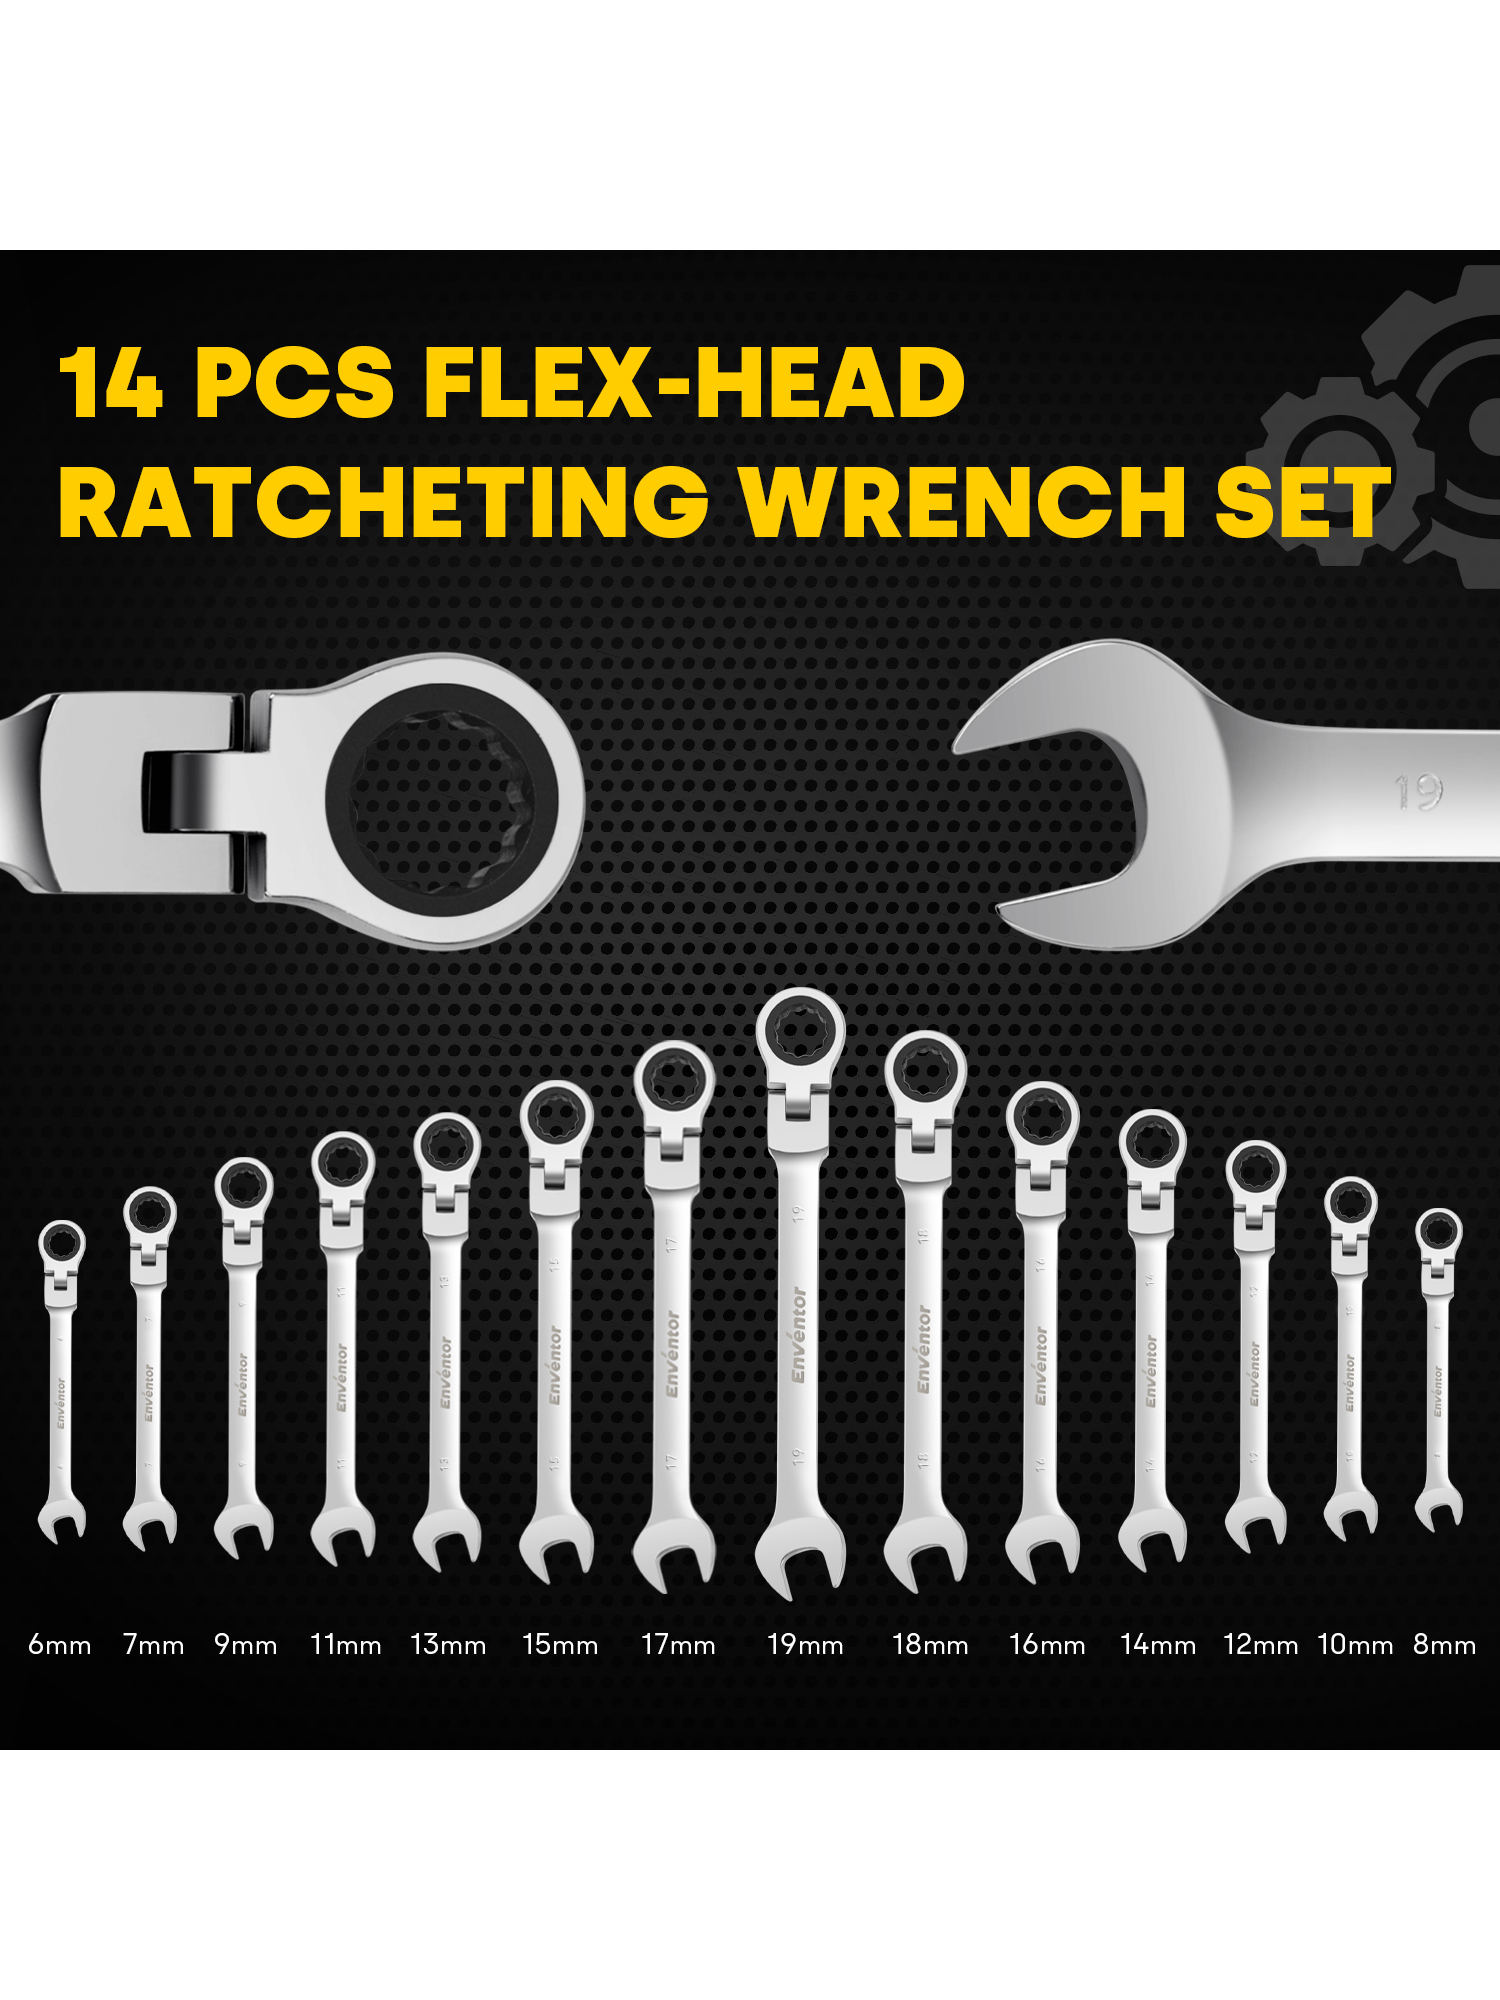 ENVENTOR Flex Head Ratcheting Wrench Set, 14 Pieces Metric 6-19mm, CRV Steel,12-Point Combination Ratchet Wrenches Set